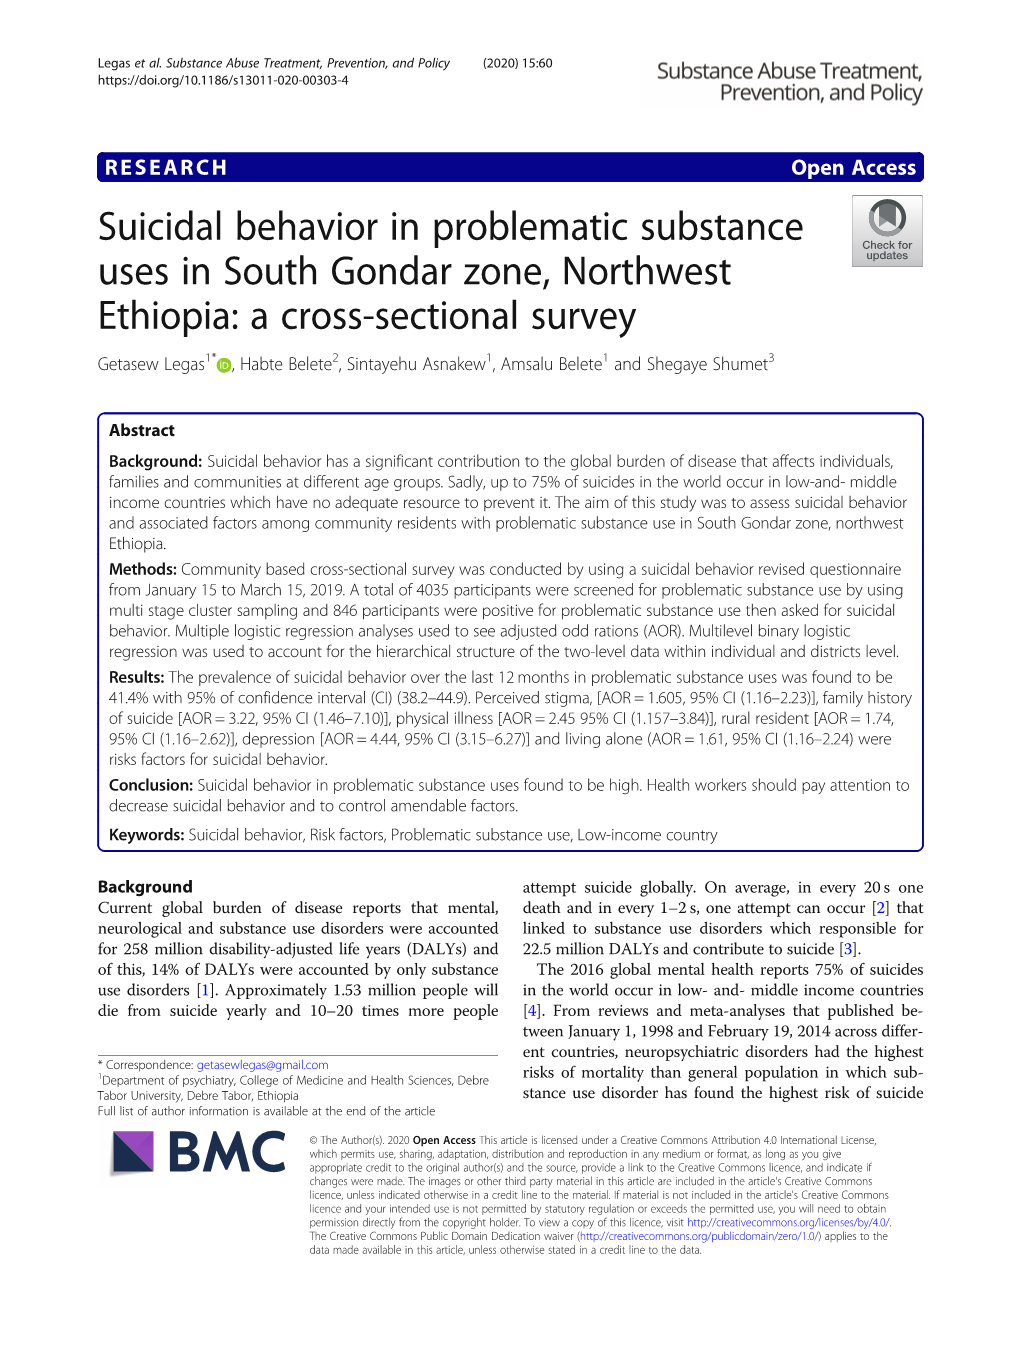 Suicidal Behavior in Problematic Substance Uses in South Gondar